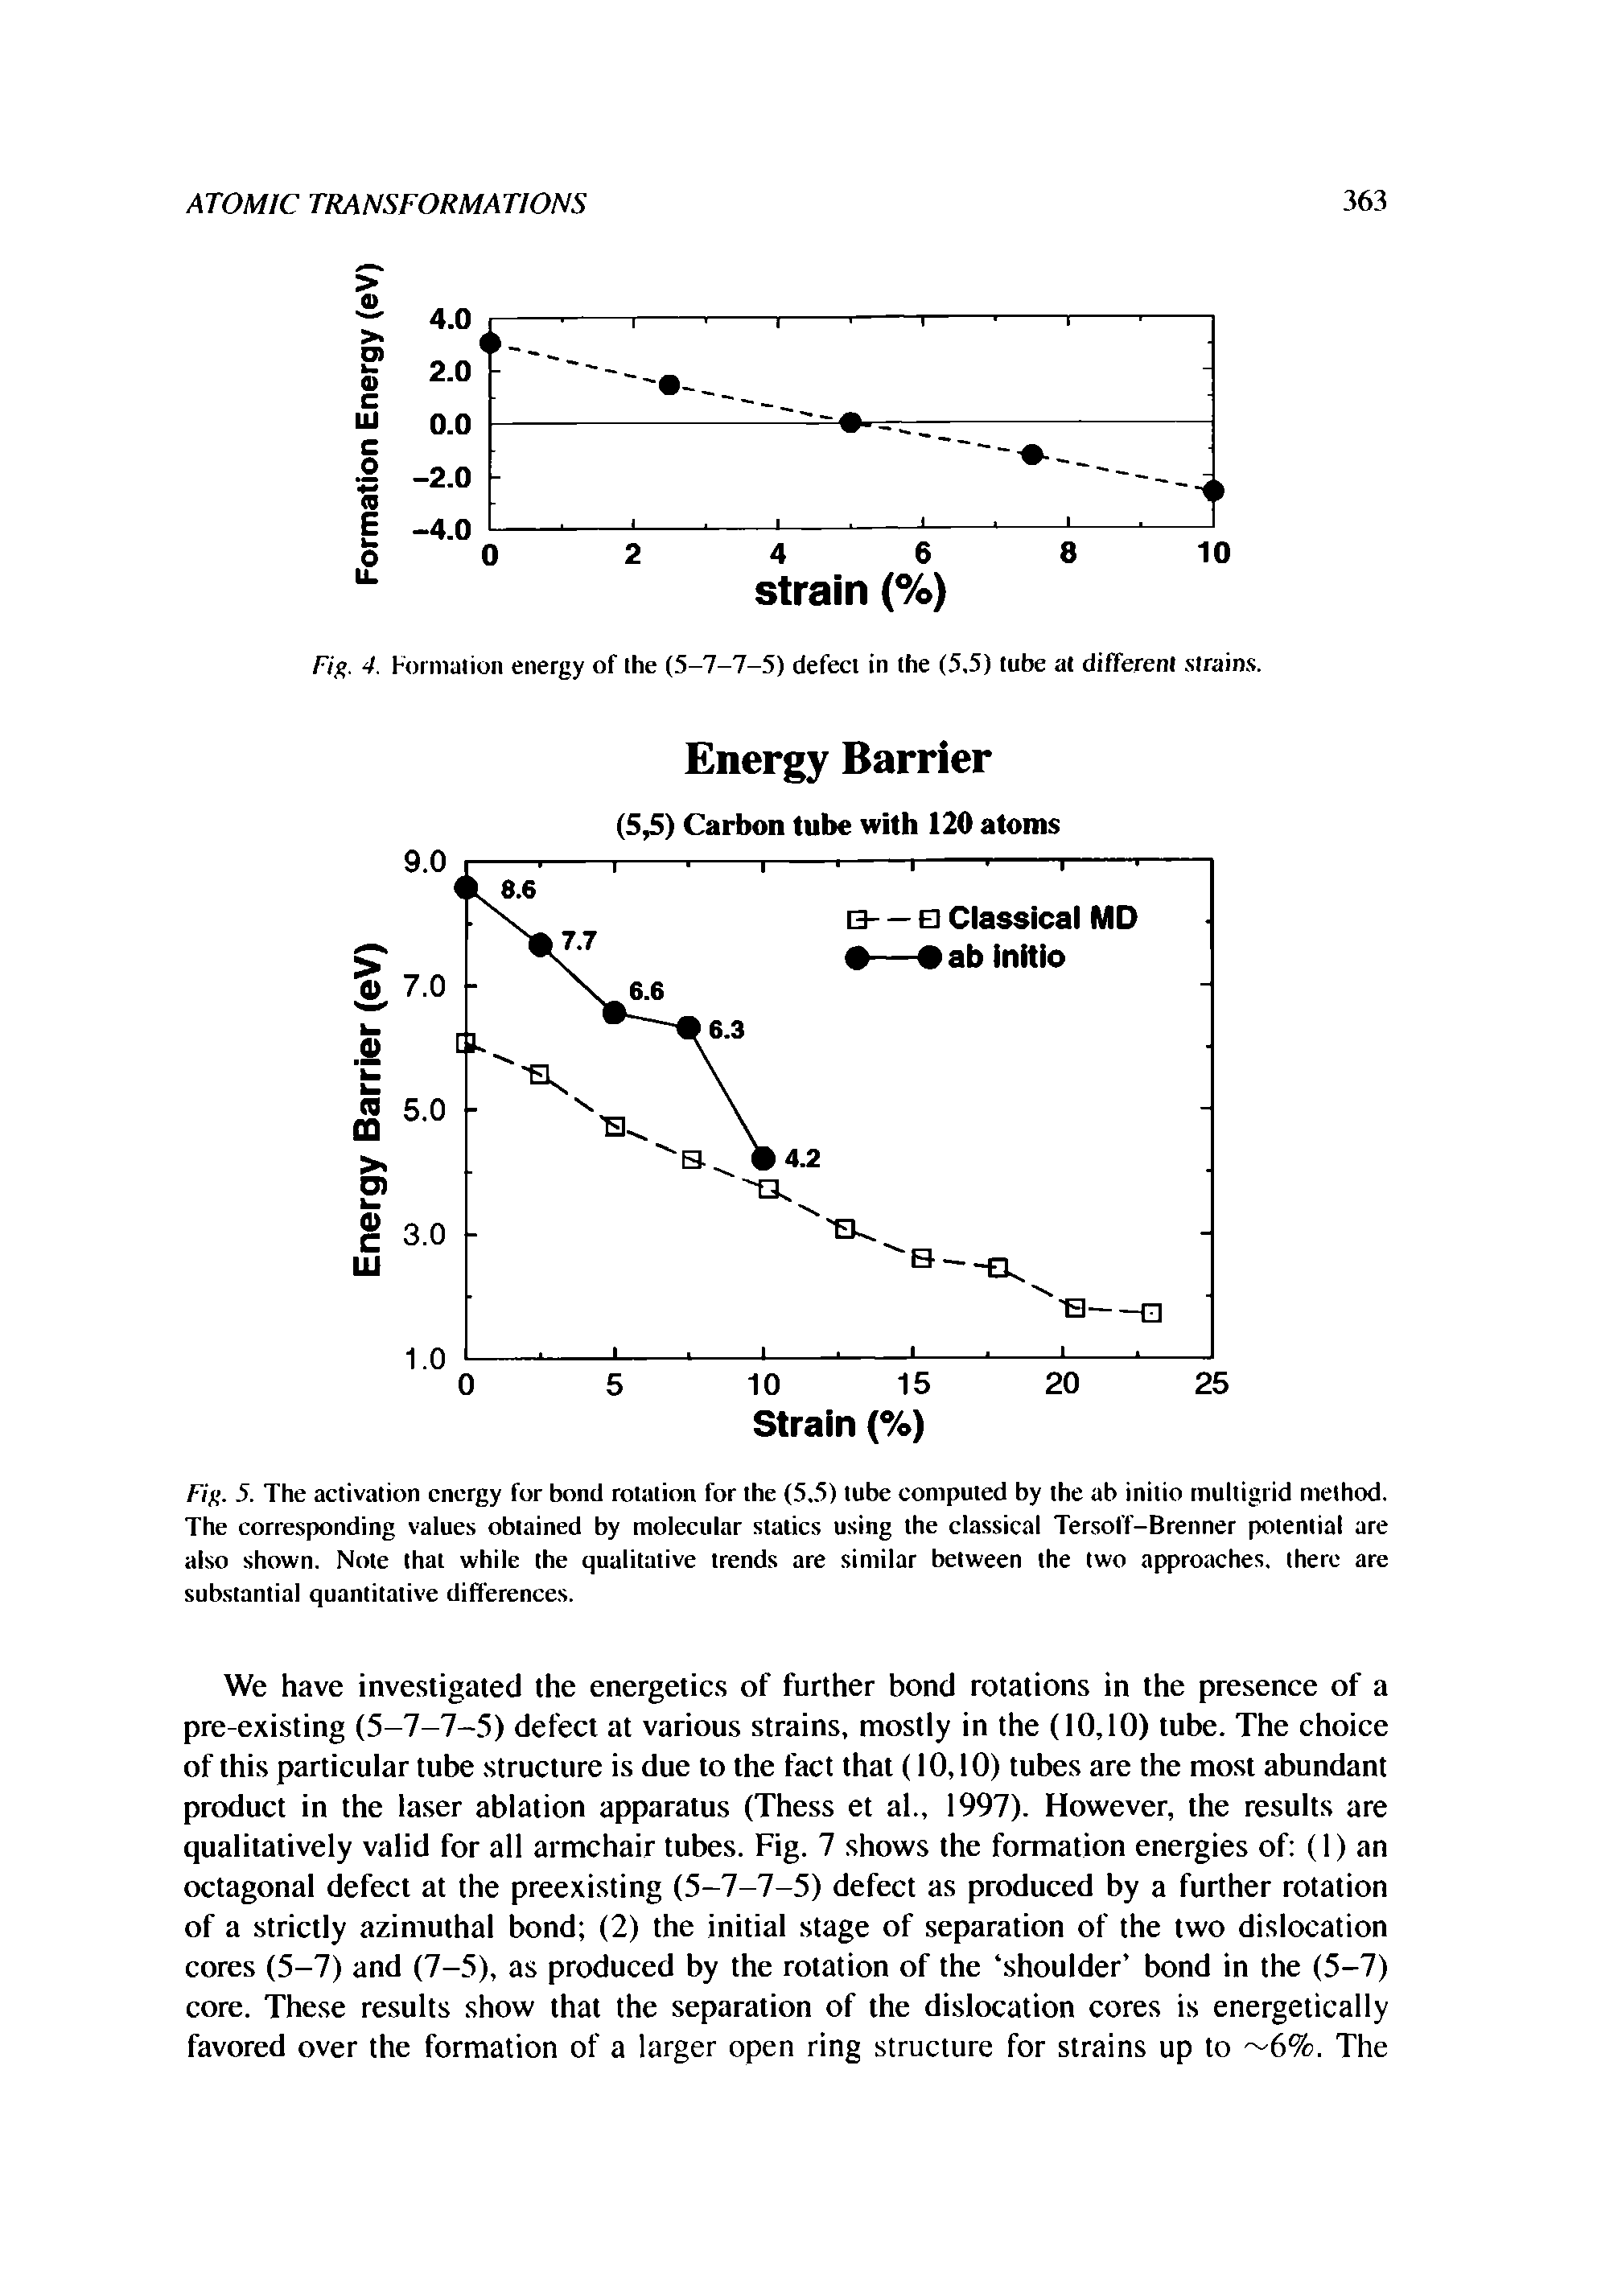 Fig. 5. The activation energy for bond rotation for the (5.5) tube computed by the ab initio multigrid method. The corresponding values obtained by molecular statics using the classical Tersoff-Brenner potential are also shown. Note that while the qualitative trends are similar between the two approaches, there are substantial quantitative differences.